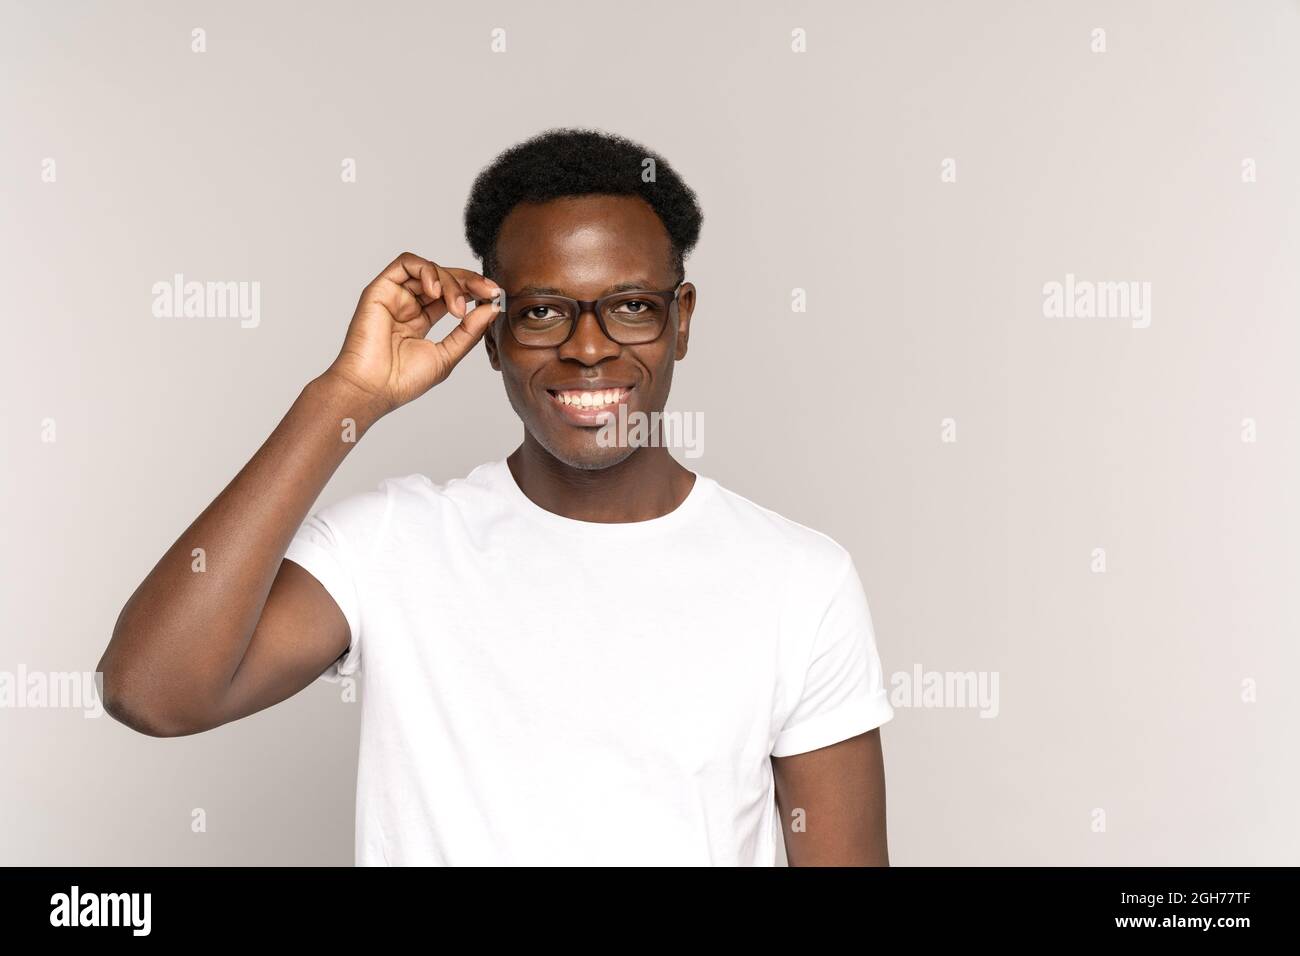 Young african guy with perfect toothy smile touch glasses wearing white t-shirt. Dentistry concept Stock Photo